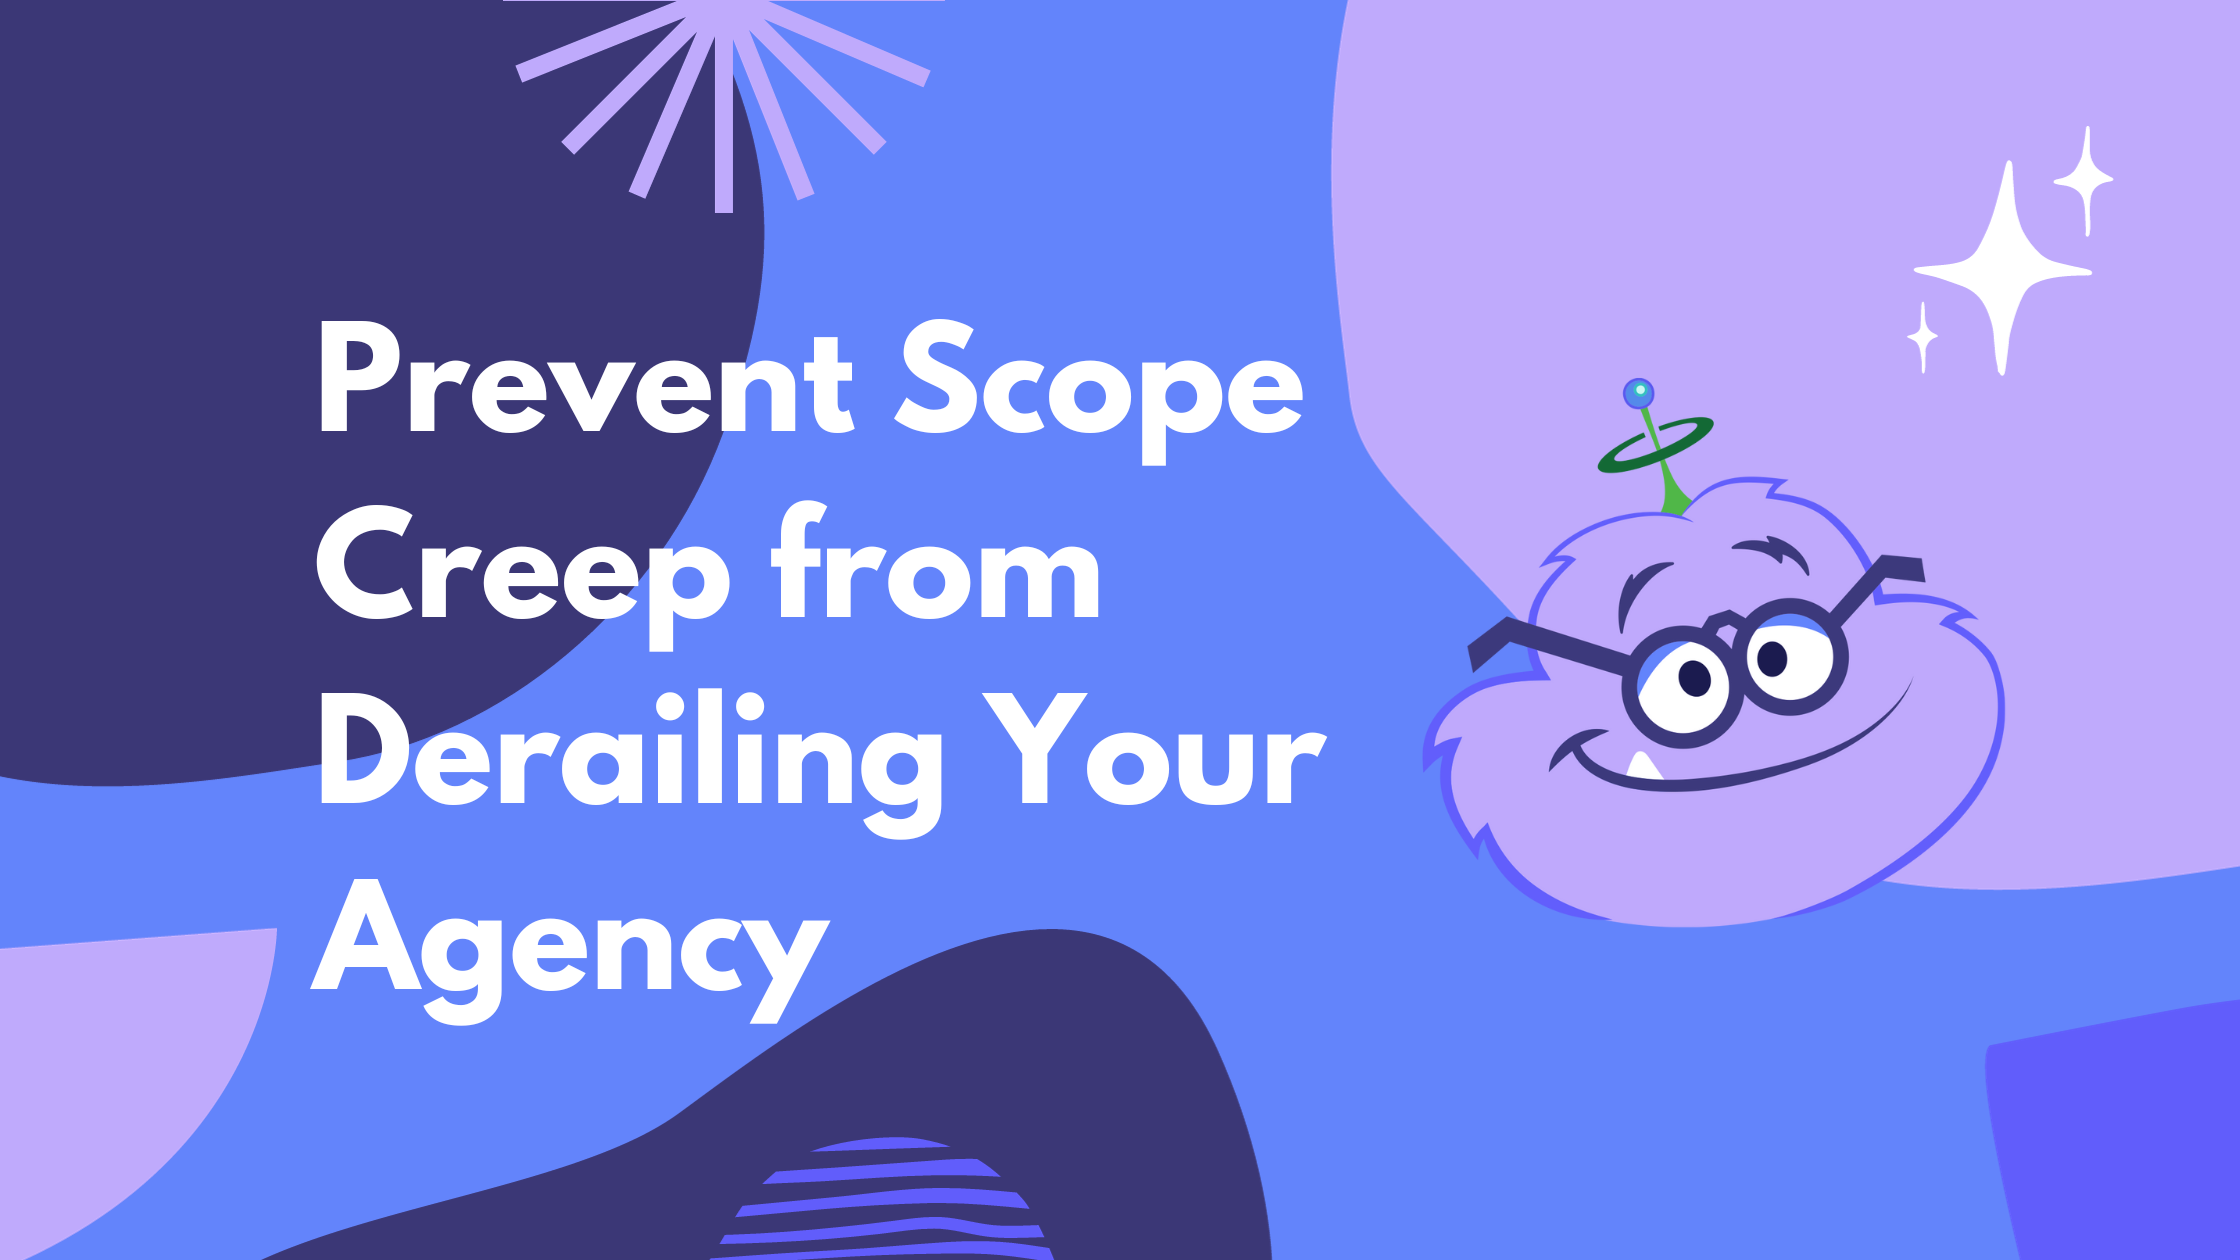 How to Prevent Scope Creep from Derailing Your Agency